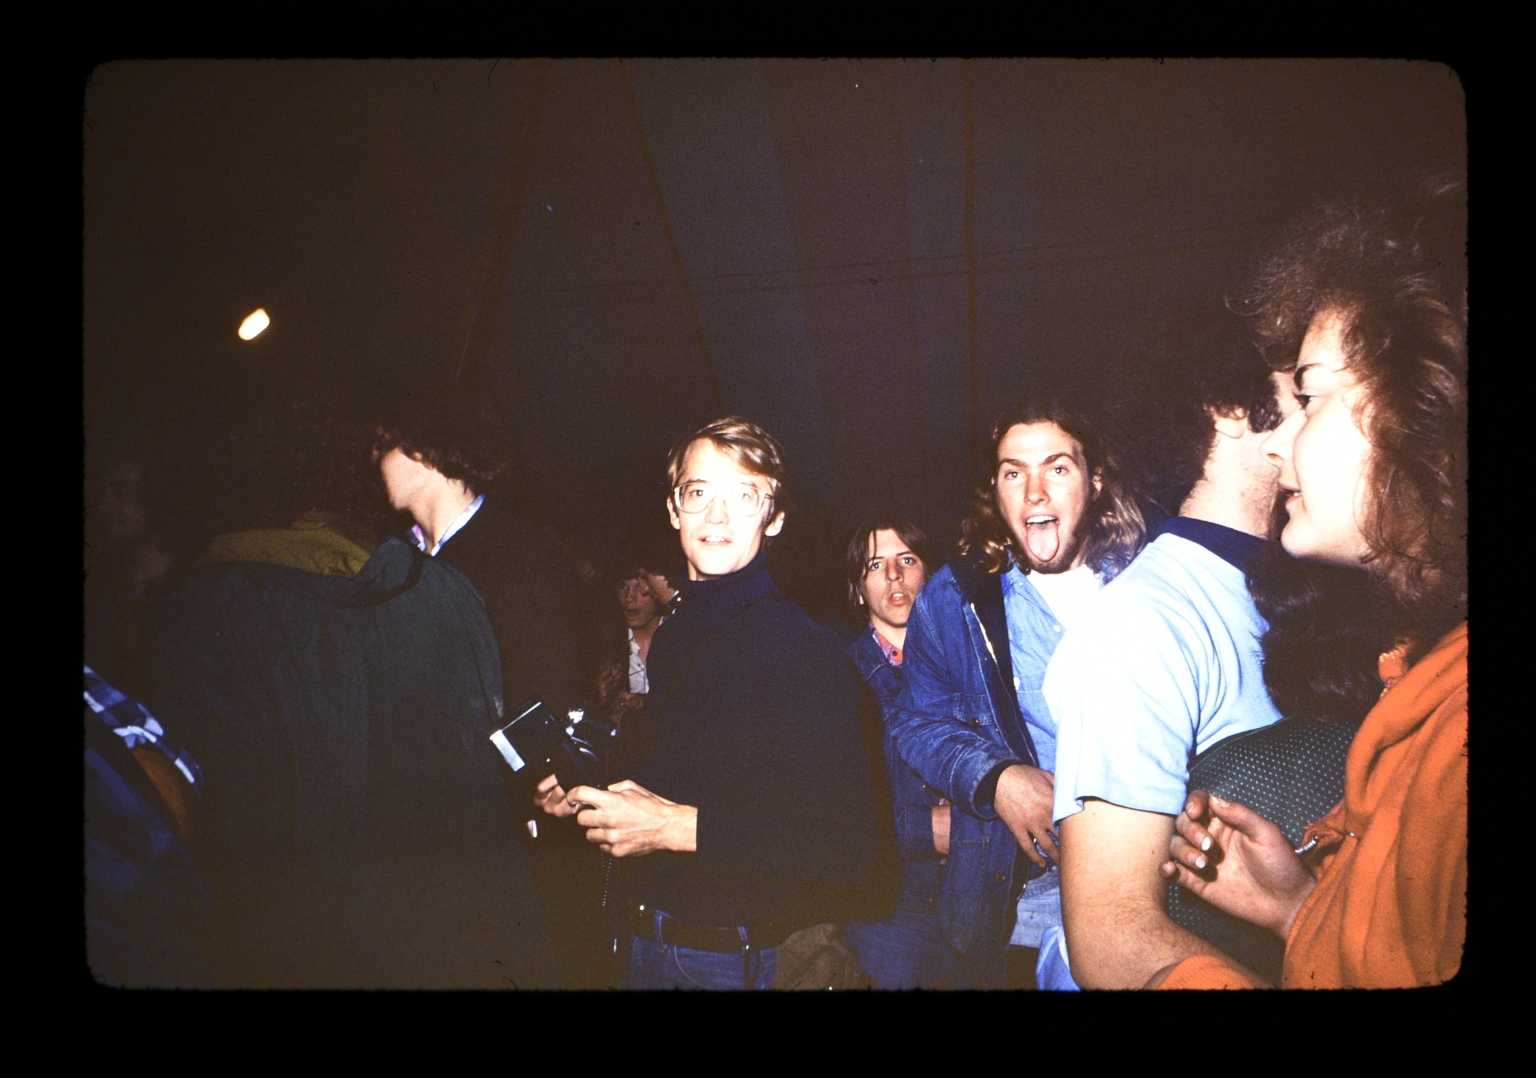 Unidentified students during a party